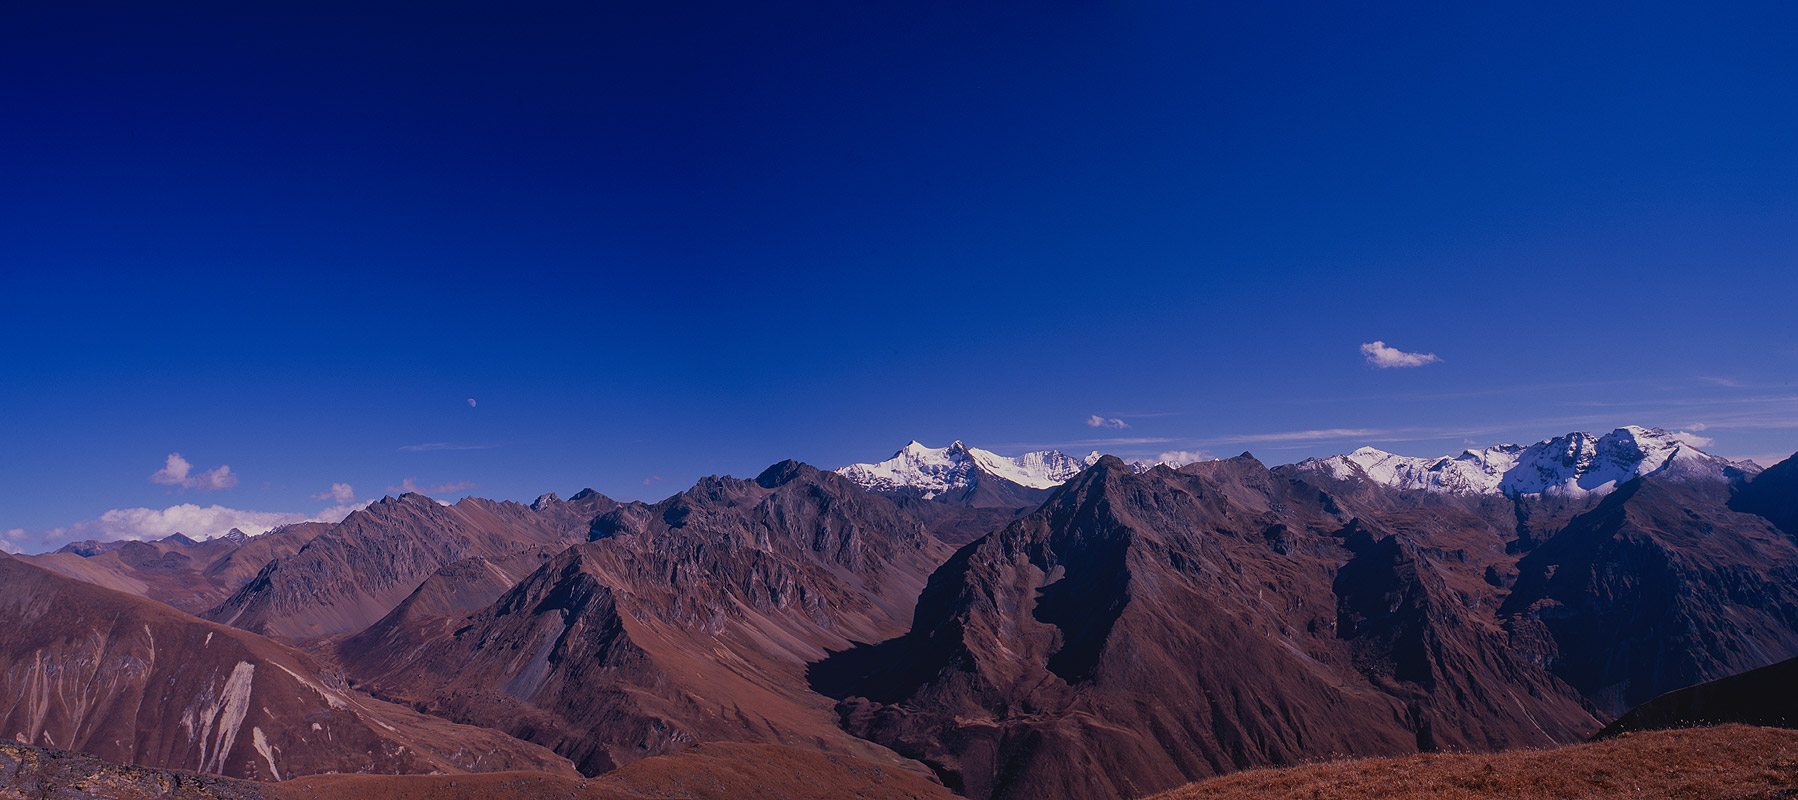 Taken from about 5100m on a ridge above the camp of Jangothang, this is a stitch of three images, looking north and east.Bronica ETRSi, 50mm, Fuji Velvia